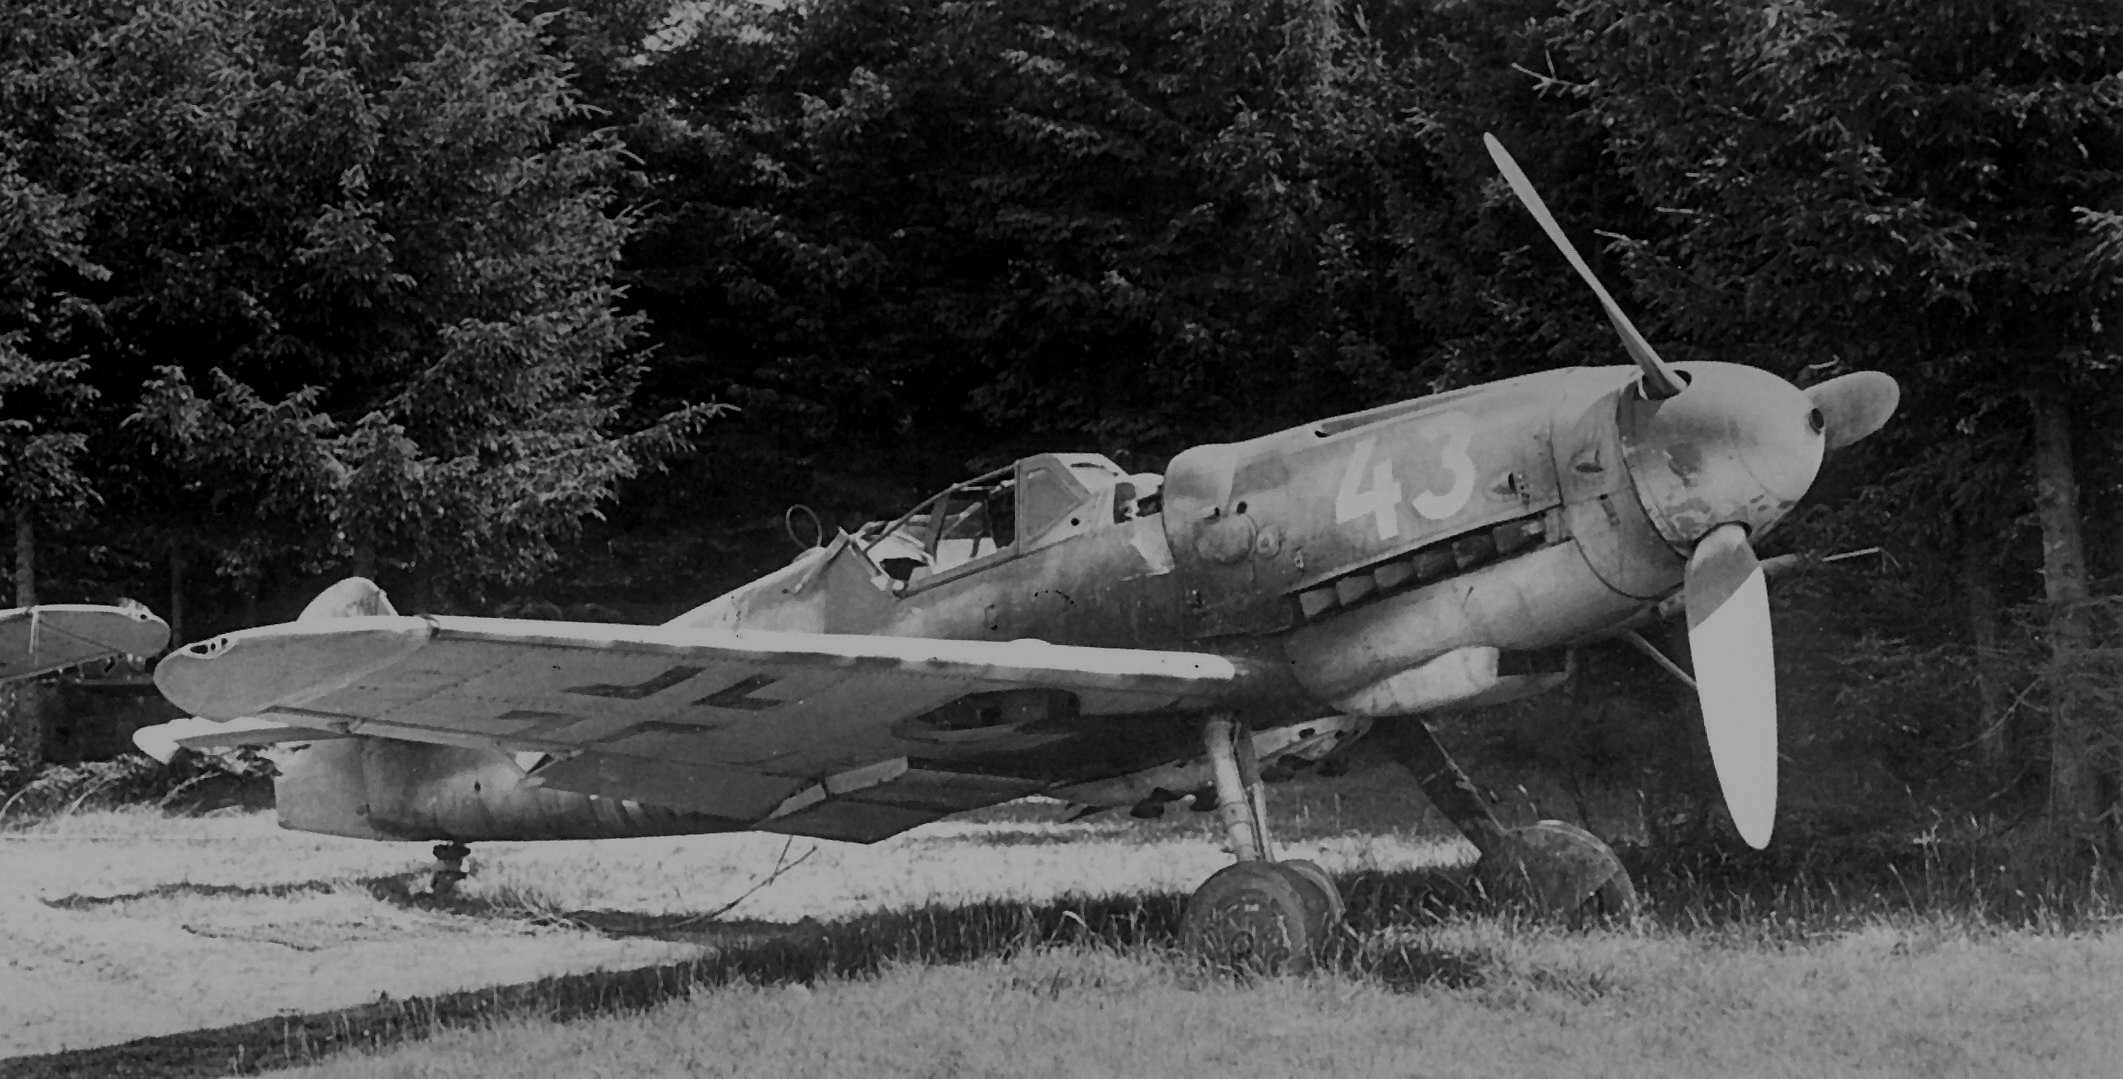 Me109-G14R1-White43-WrkN463147-with-Erla-Haube-Canopy-&-T4-Type-Rudder-Defense-of-the-Reich-At-Lechfeld-Germany-May-1945-20-add3f-s.jpg (211K)